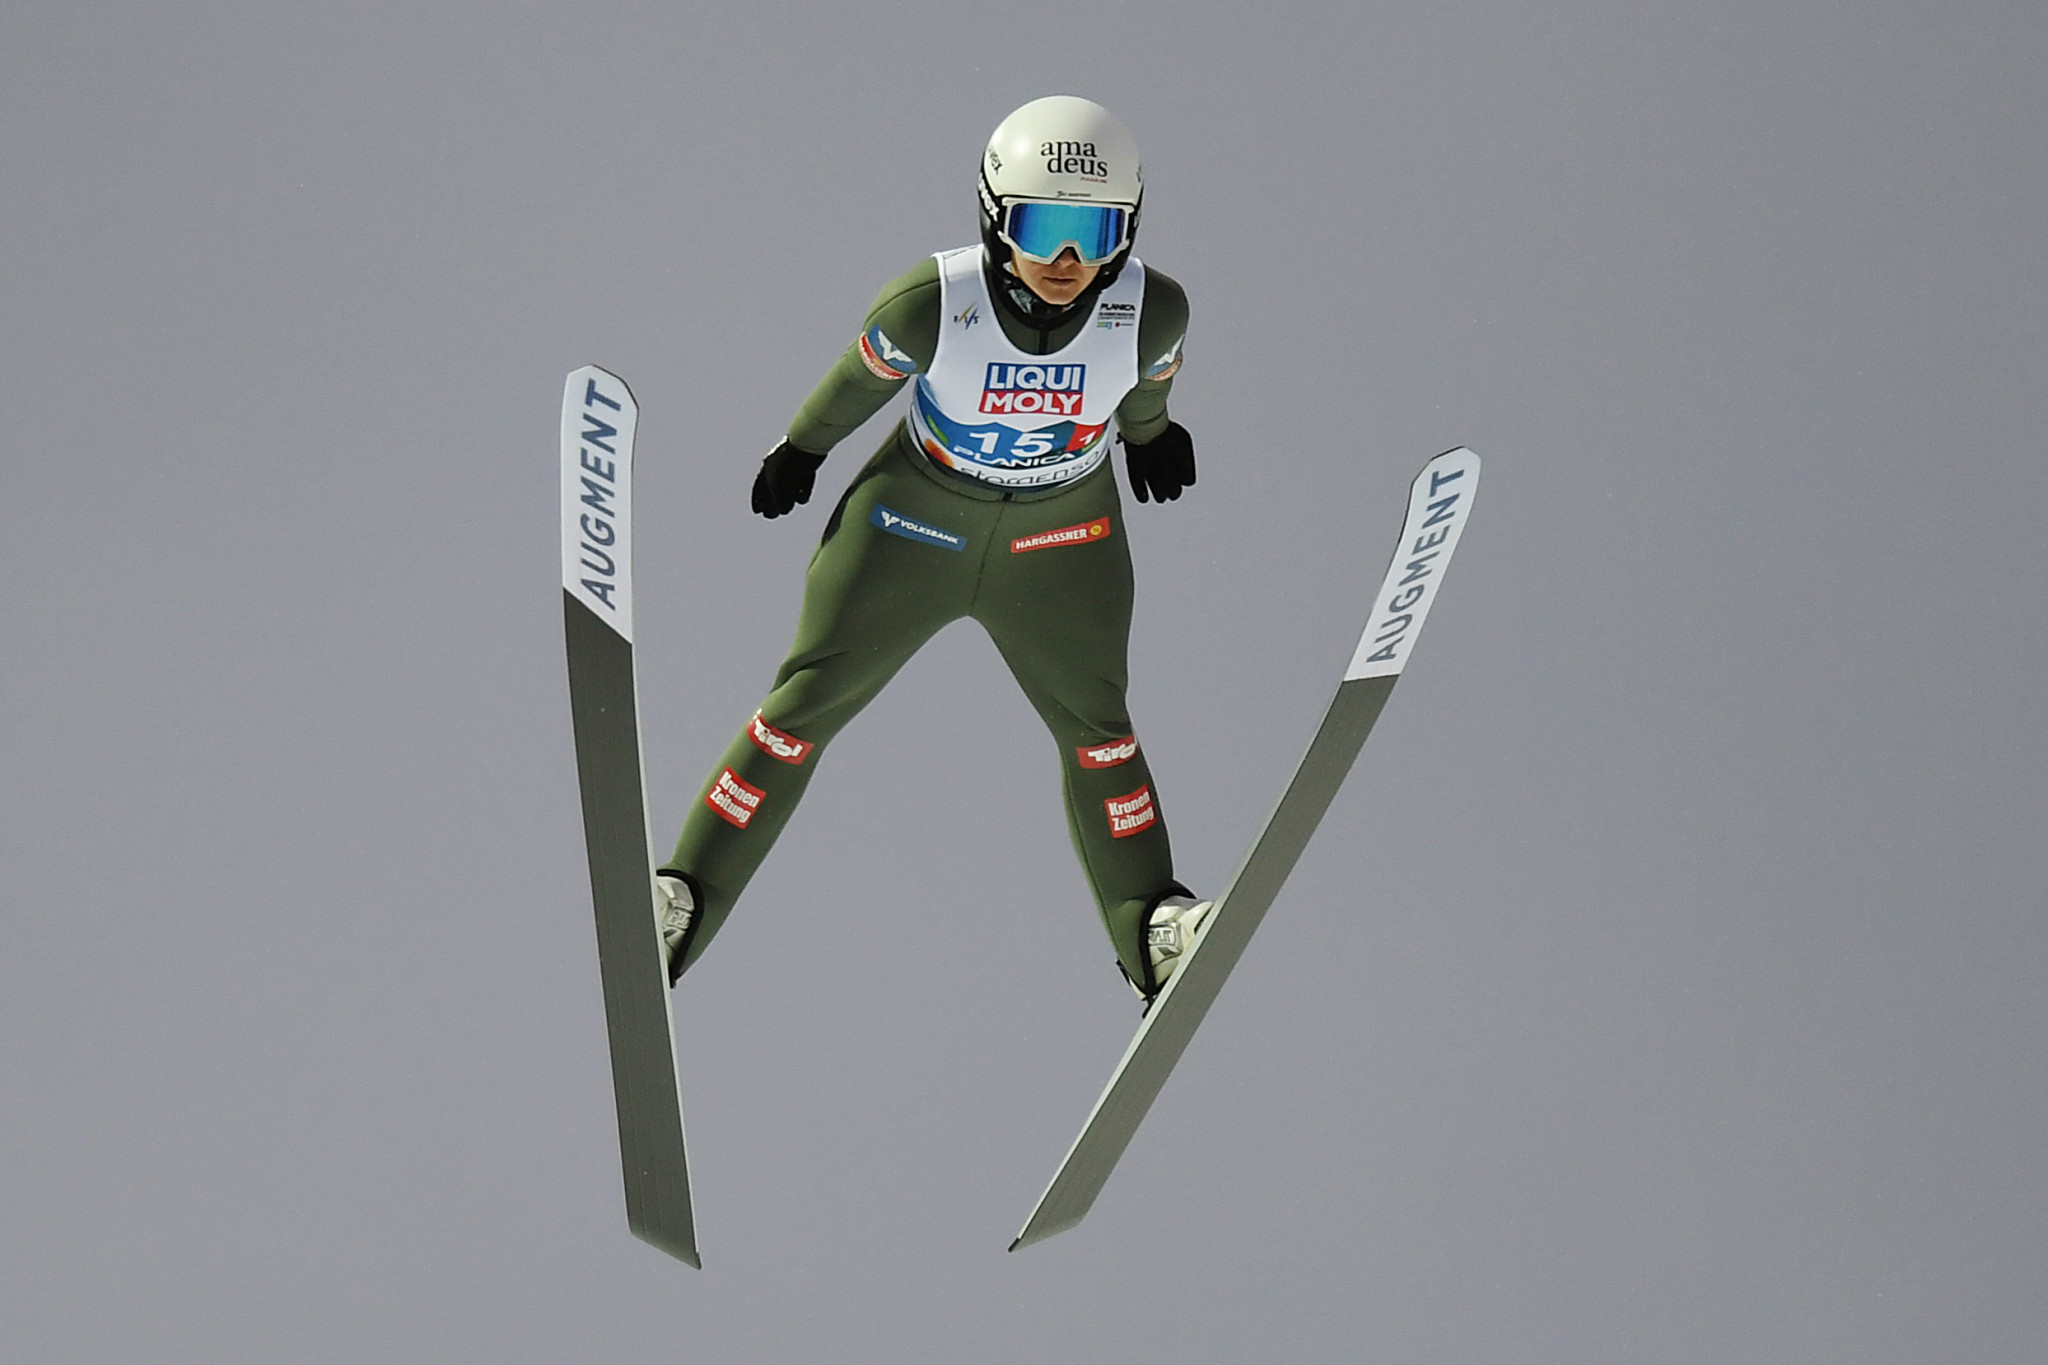 Chiara Kreuzer of Austria triumphed in the women's large hill World Cup event in Oslo ©Getty Images